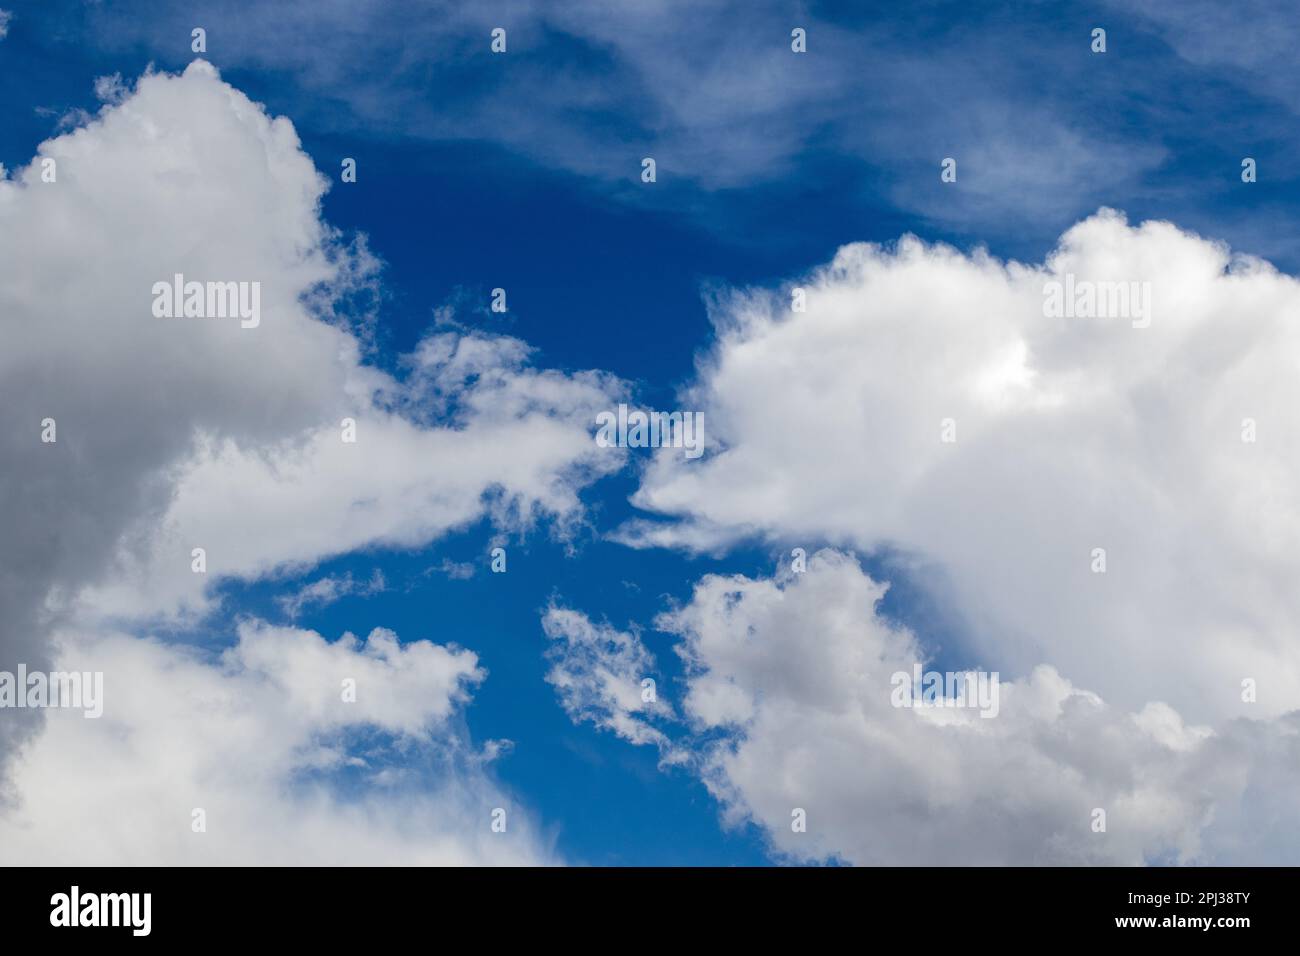 The shapes of two hand puppets in the clouds Stock Photo